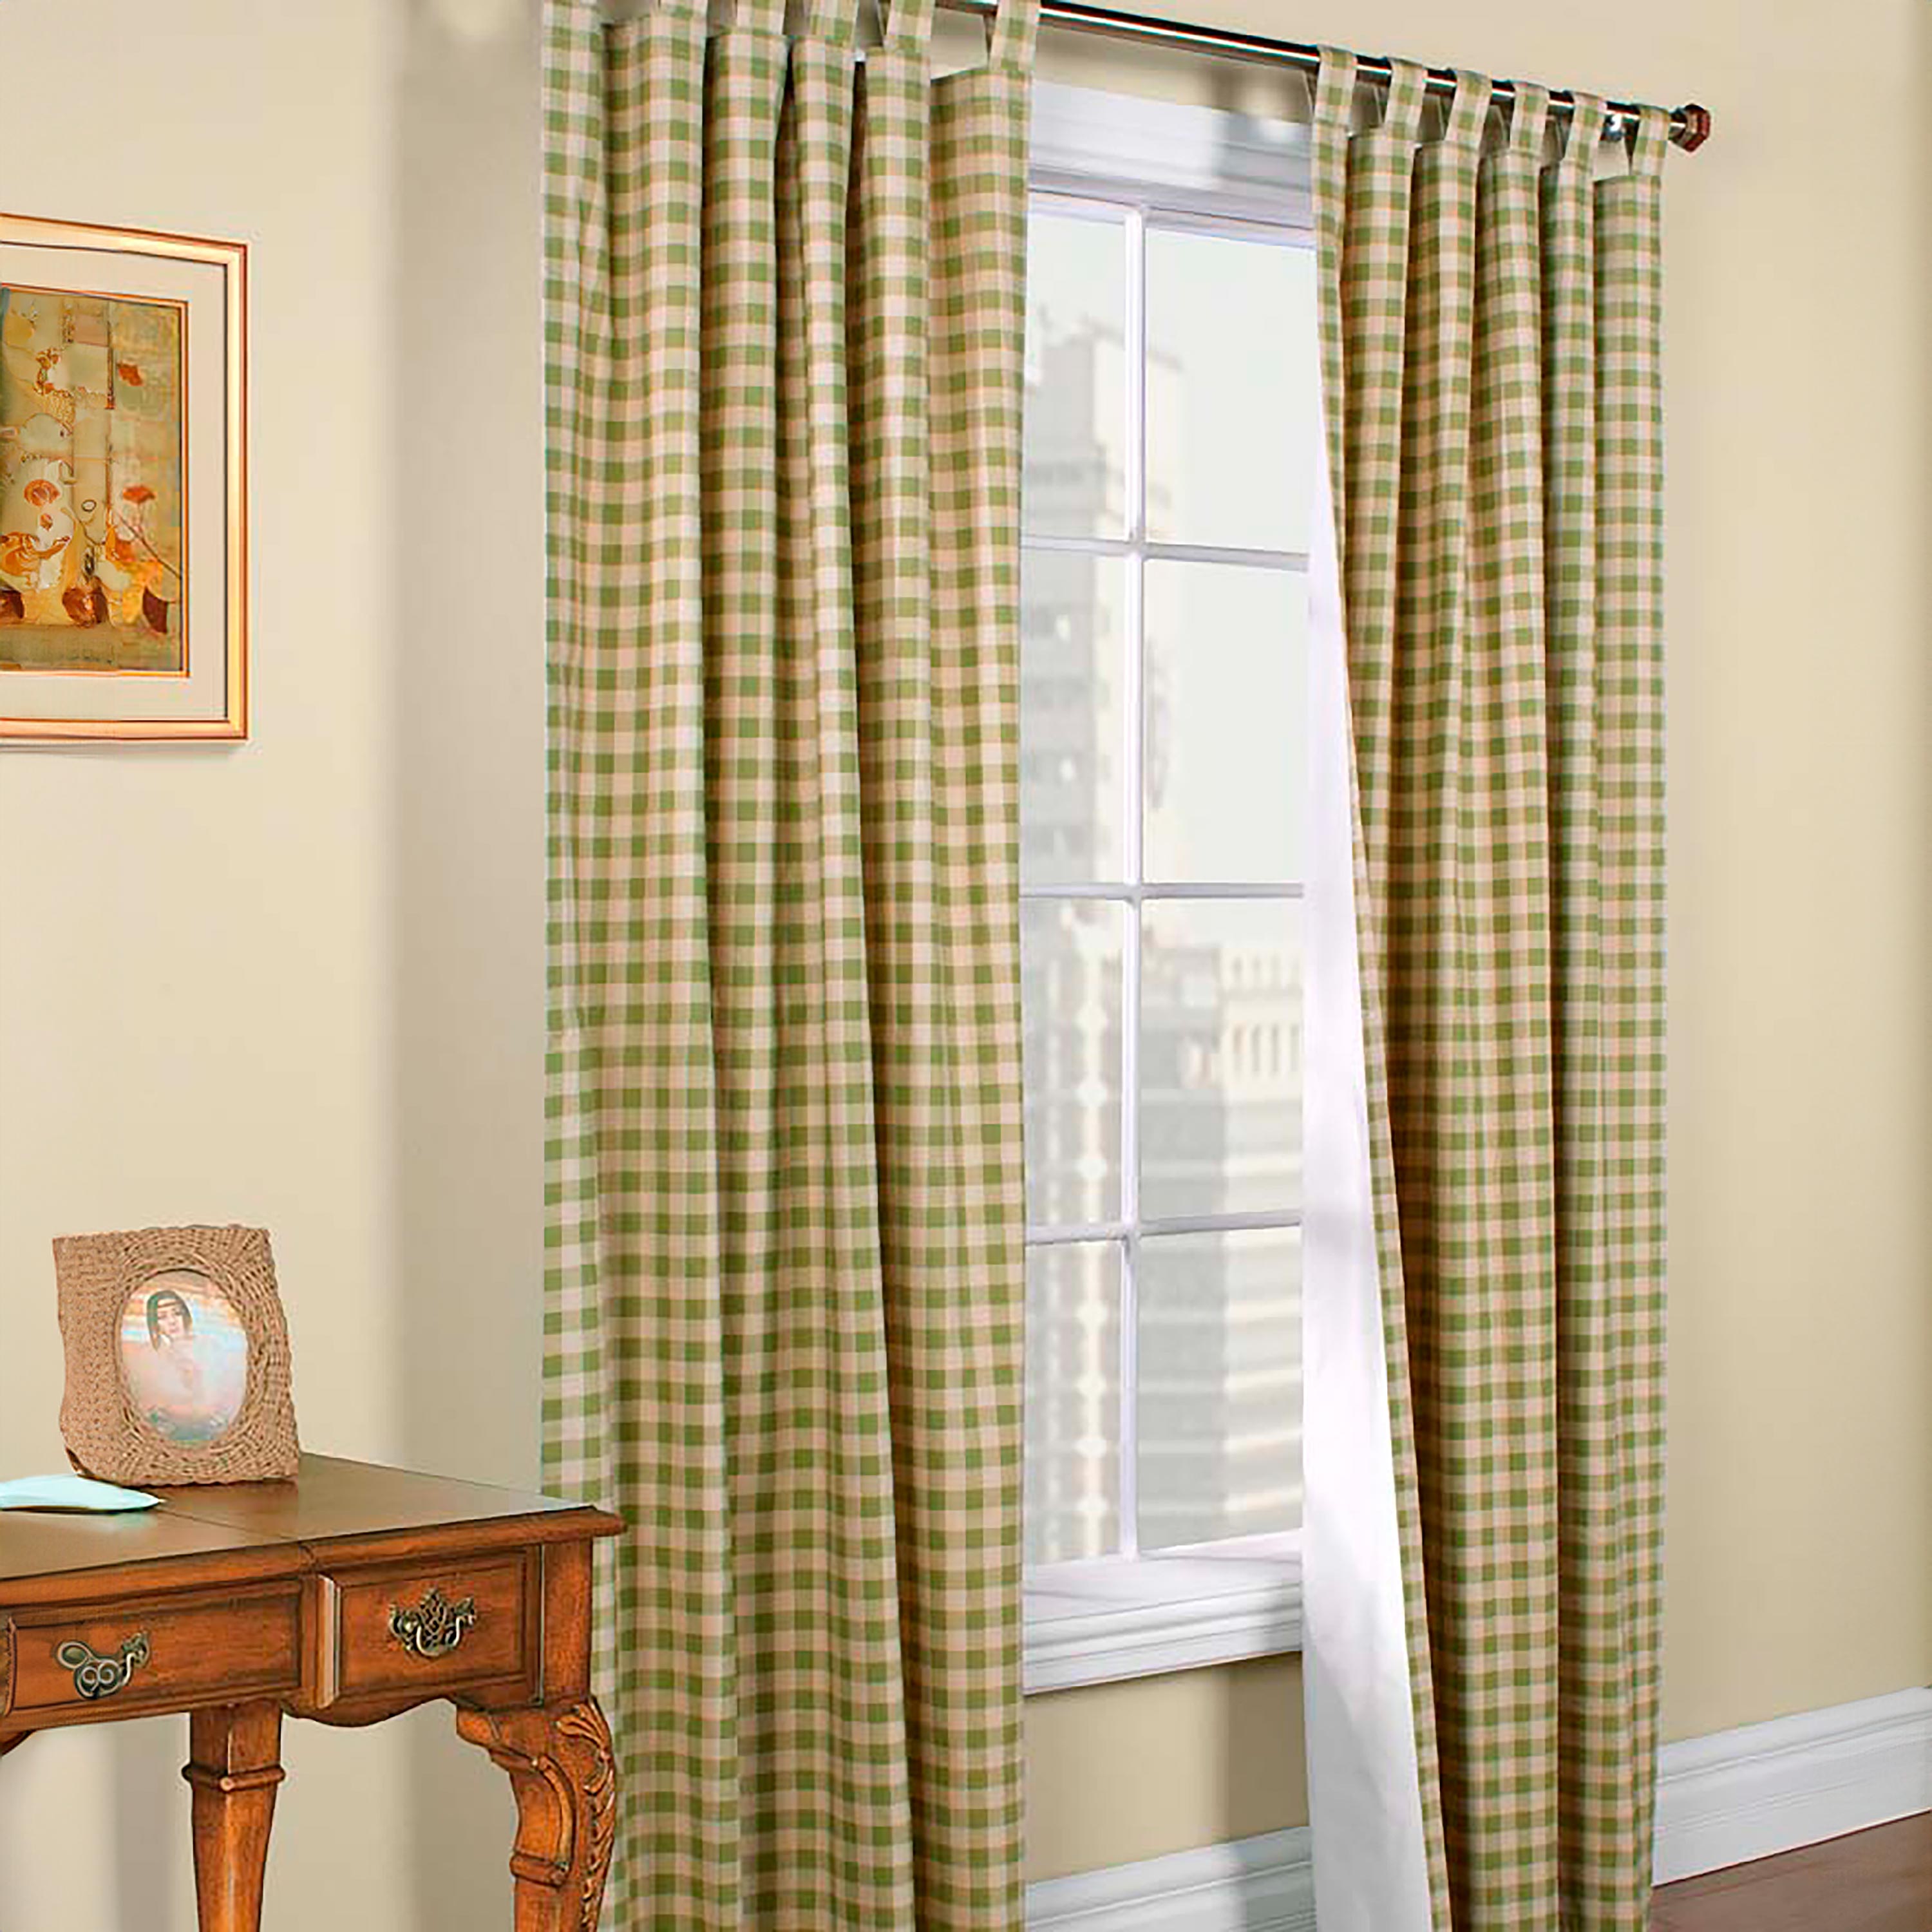 Image of 15"L x 40"W Thermalogic Check Tab-Top Valance Curtain, in Sage